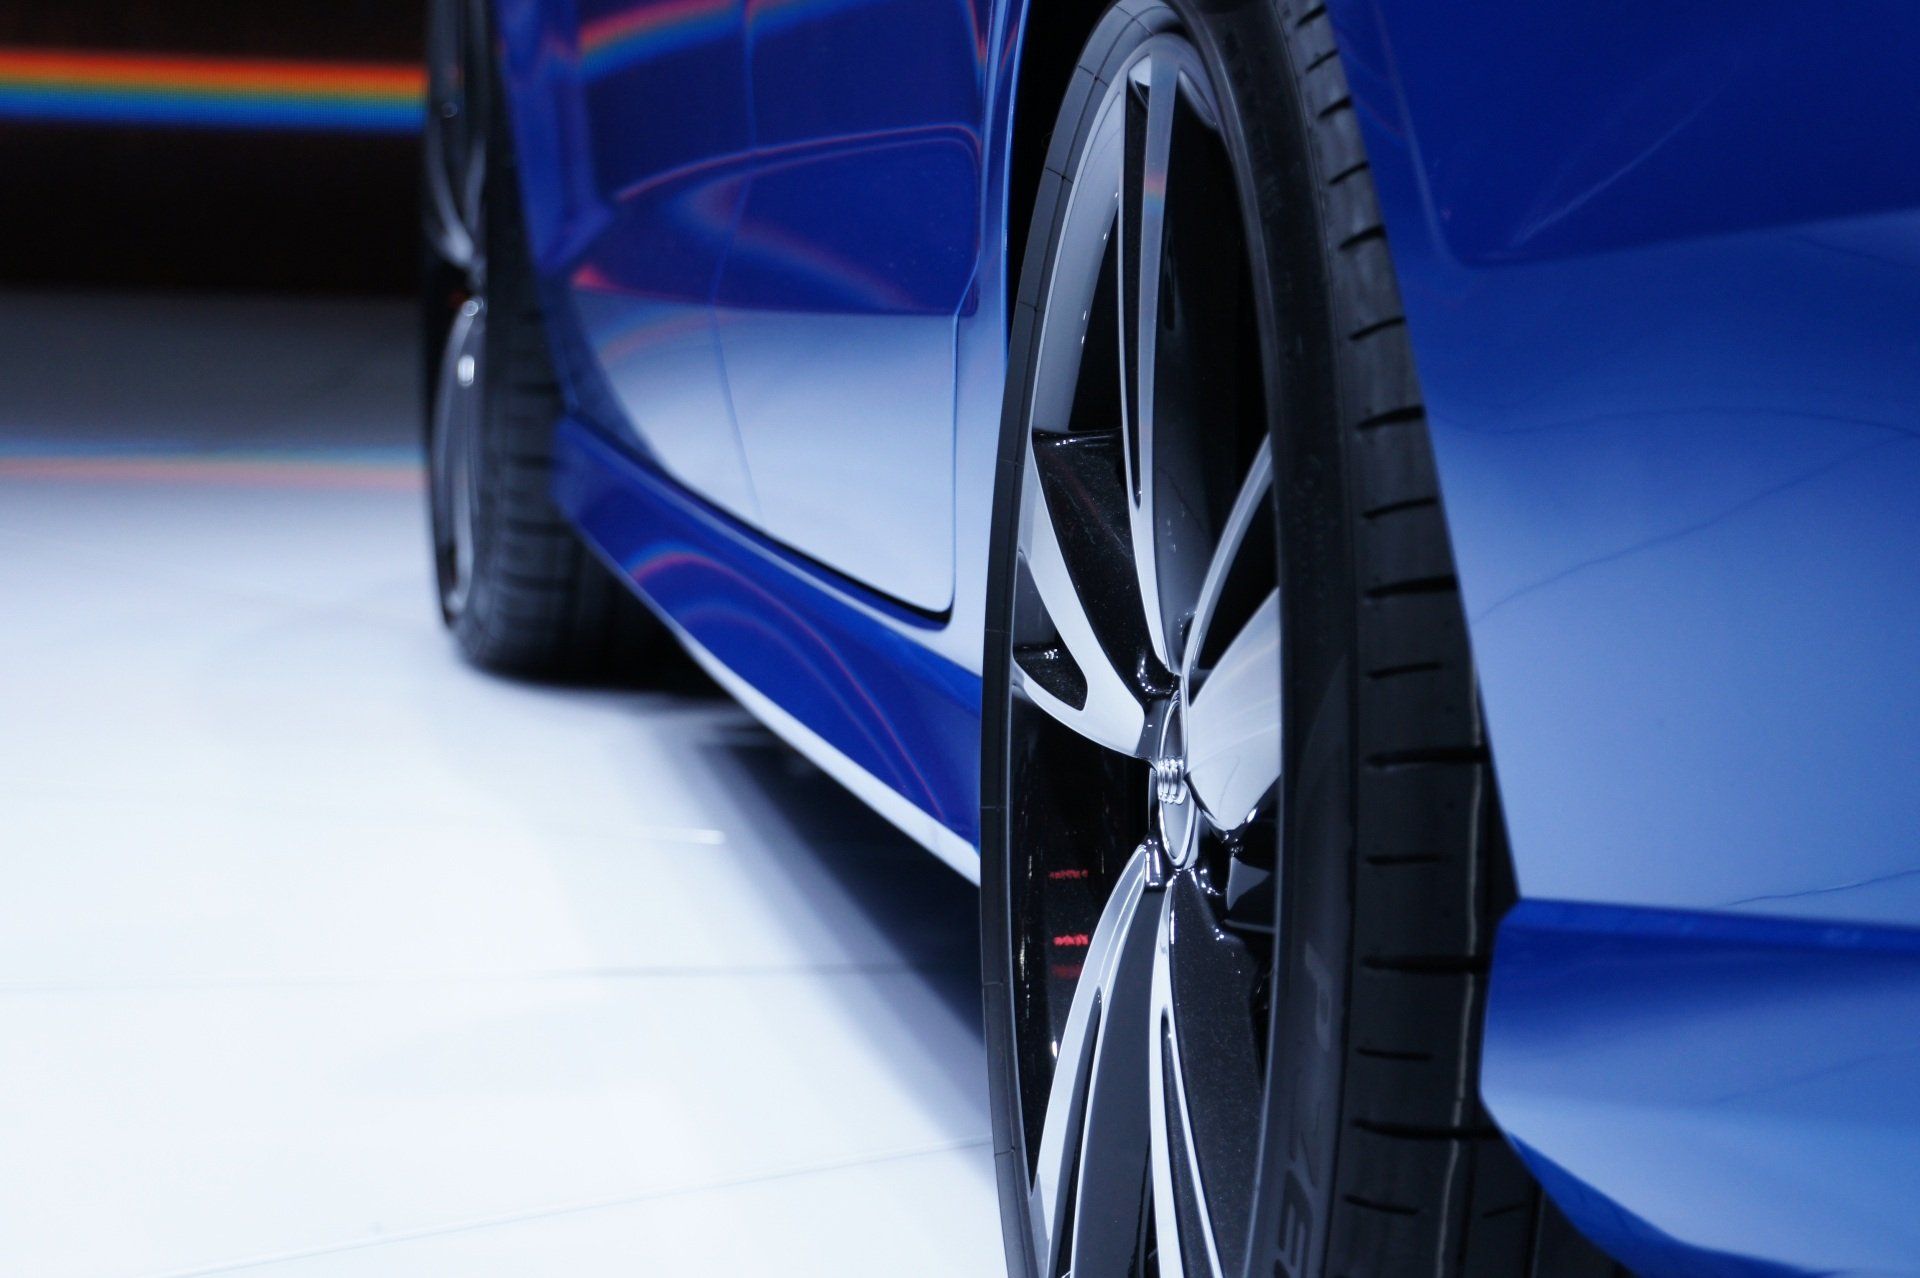 A close up of a blue car wheel on a white surface